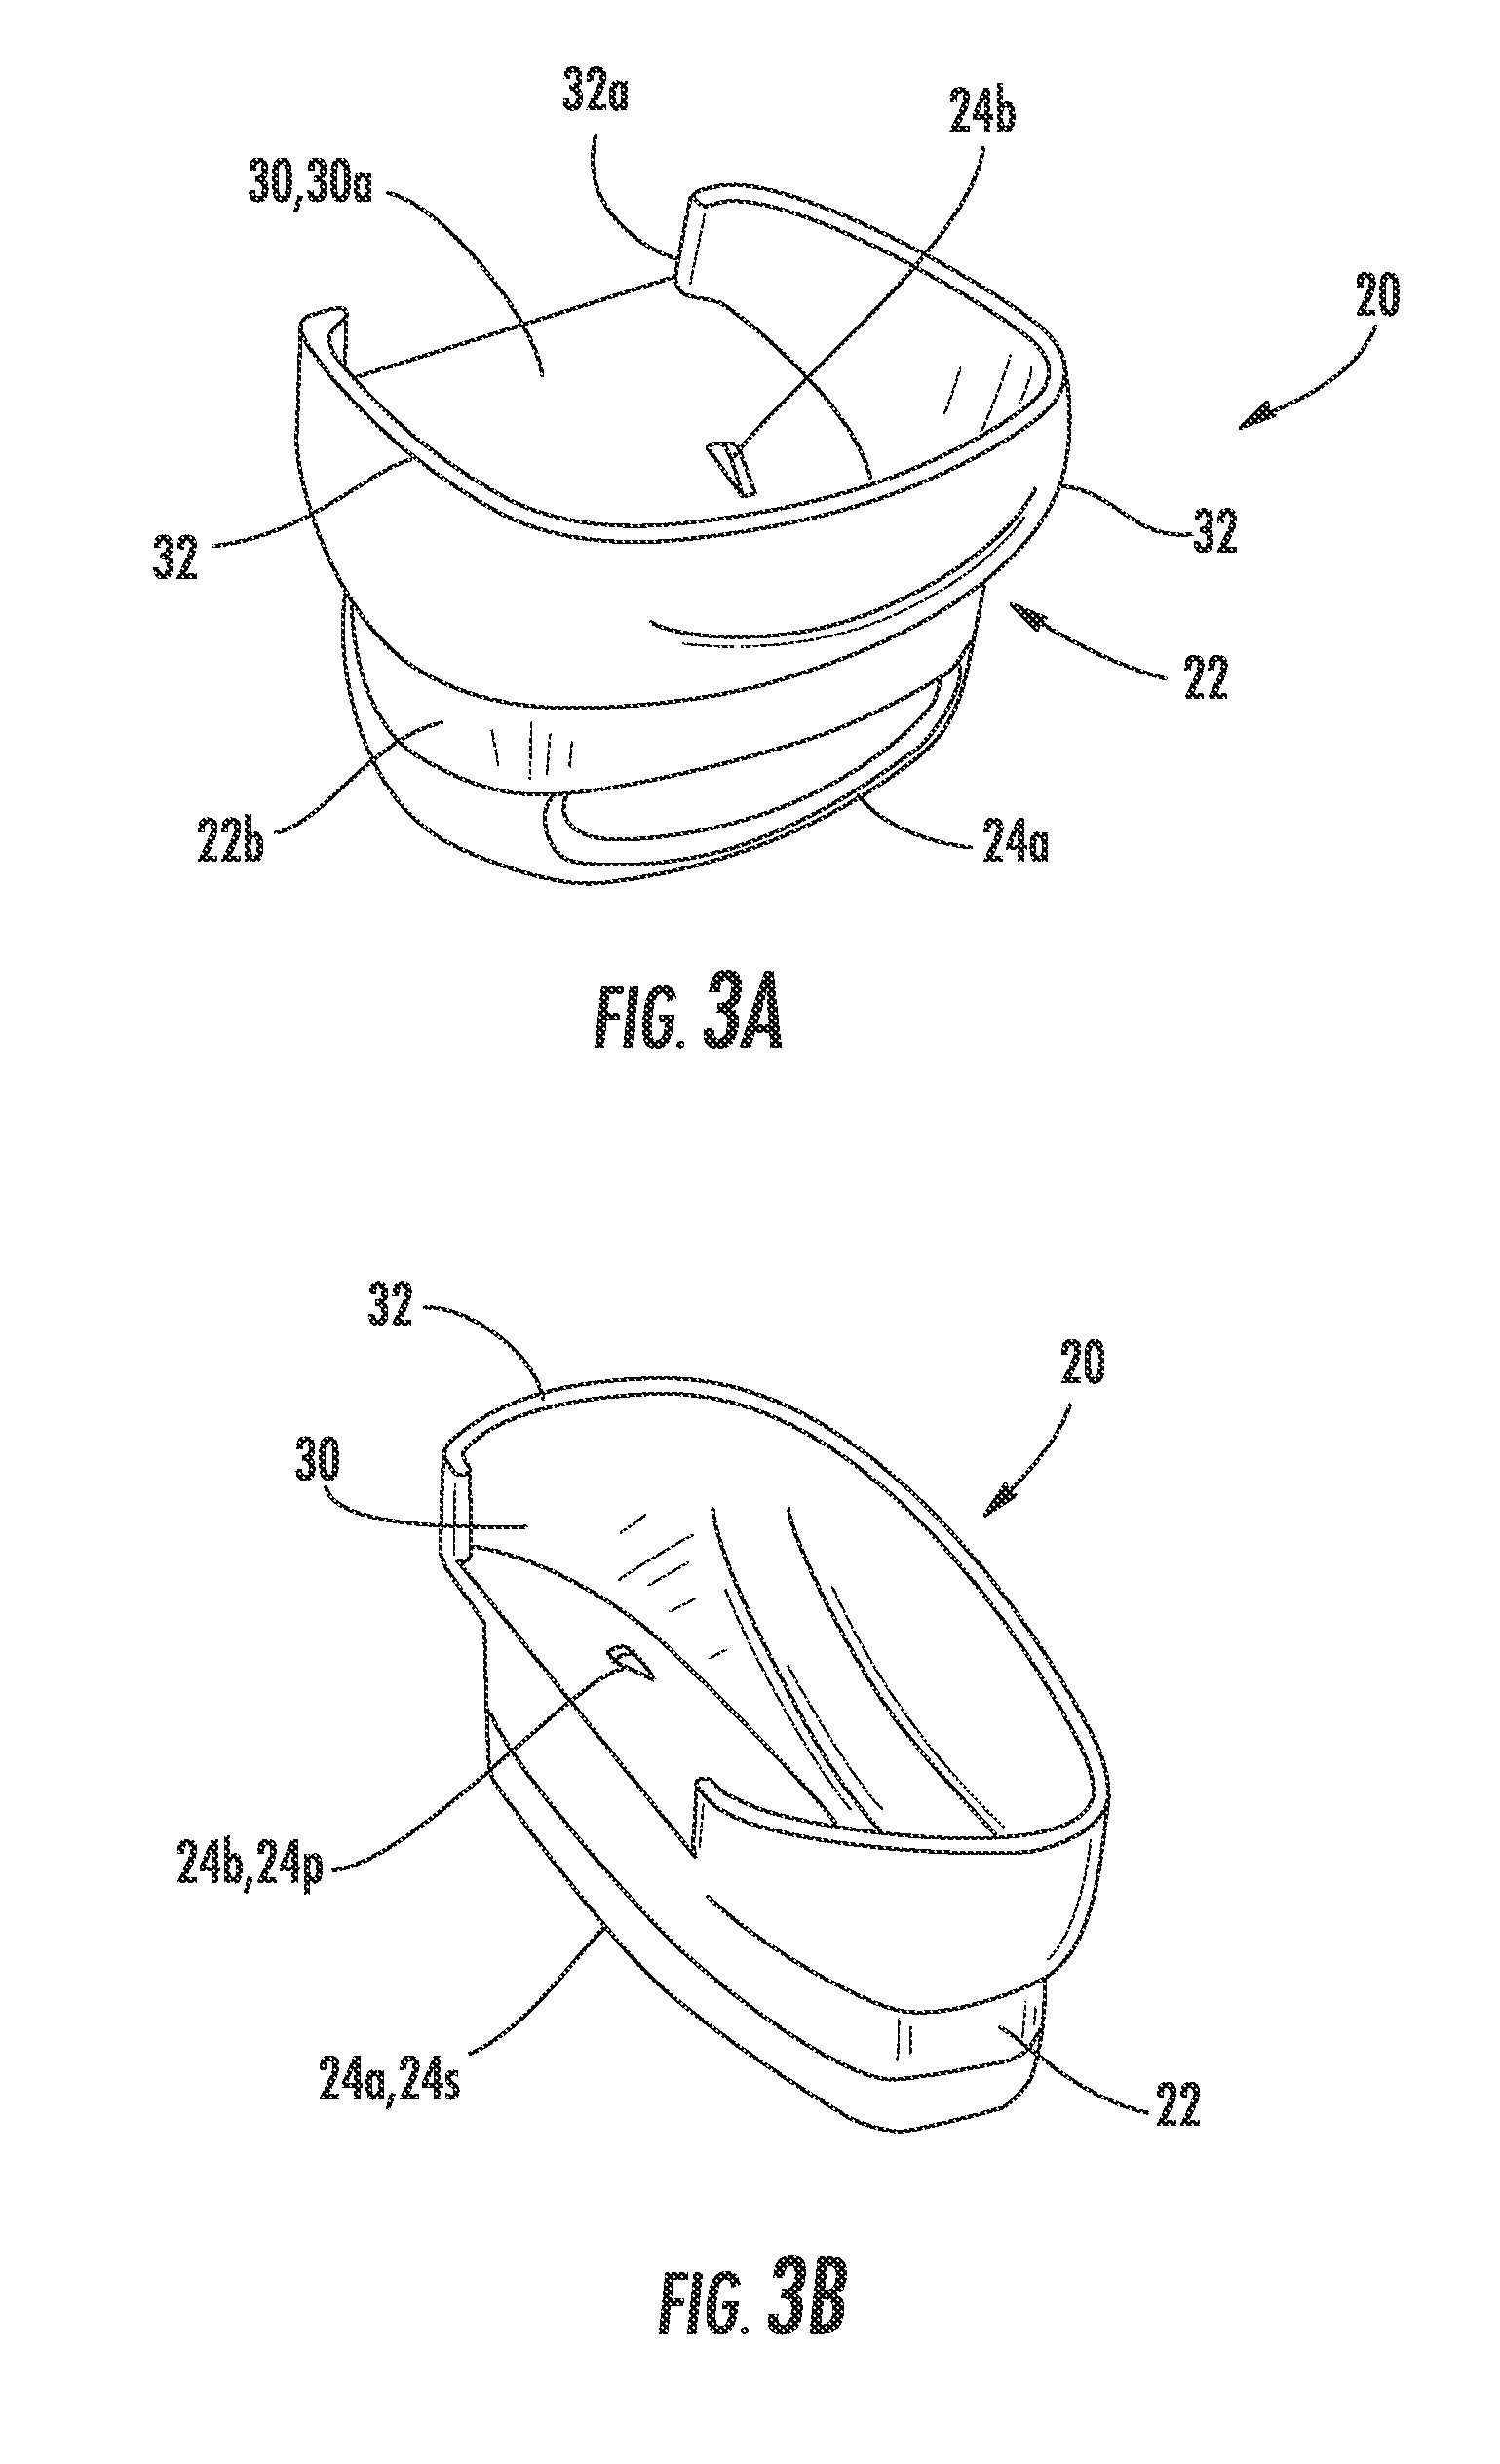 Docking Station And Device Adapter For Use In A Docking Station